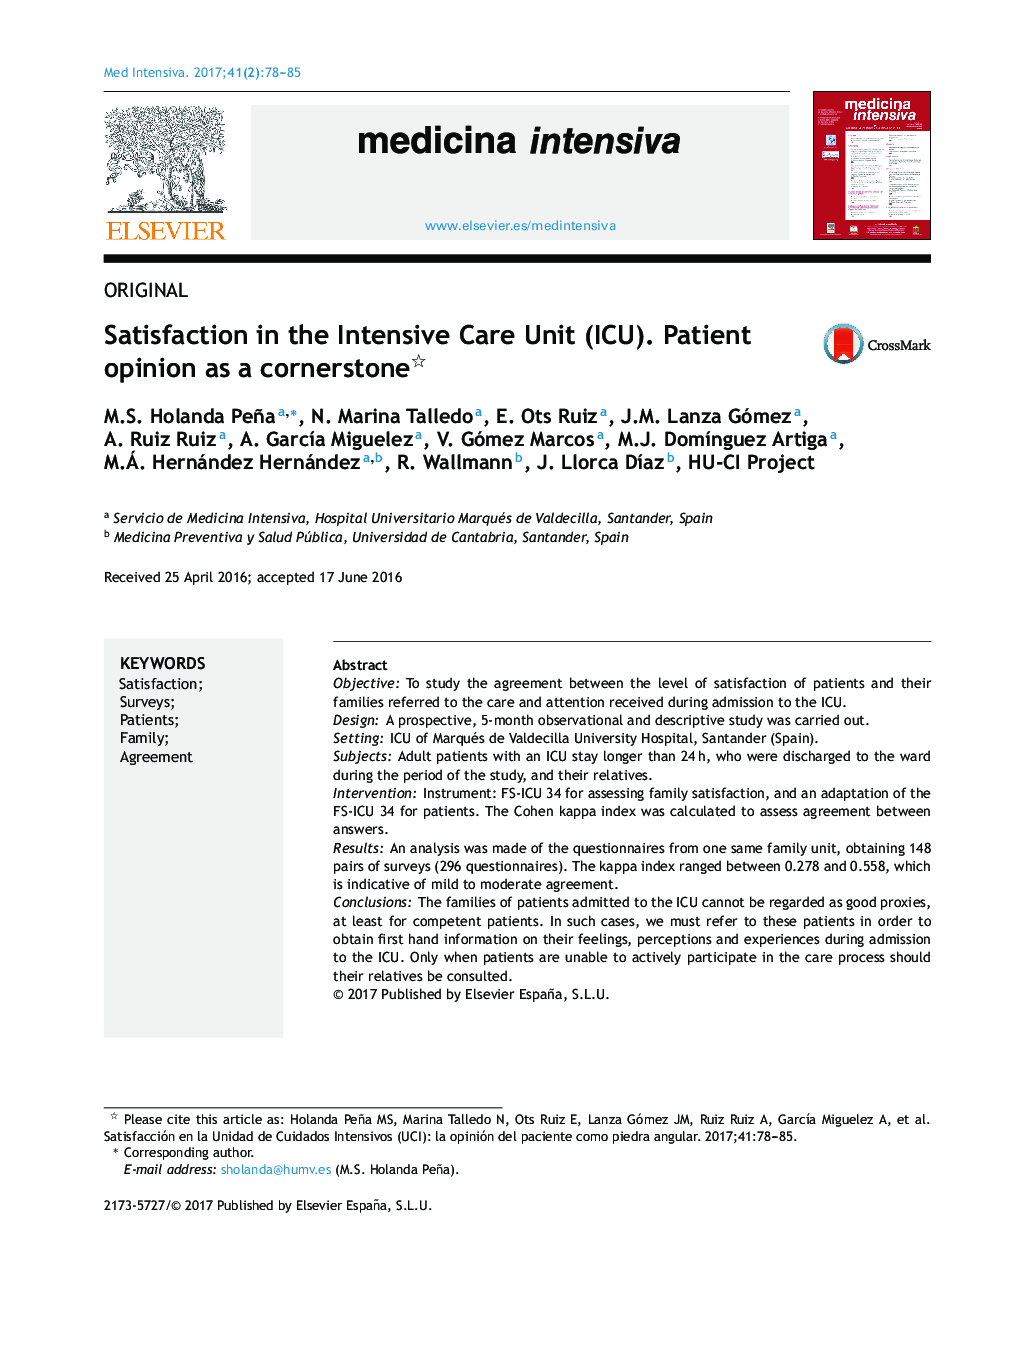 Satisfaction in the Intensive Care Unit (ICU). Patient opinion as a cornerstone